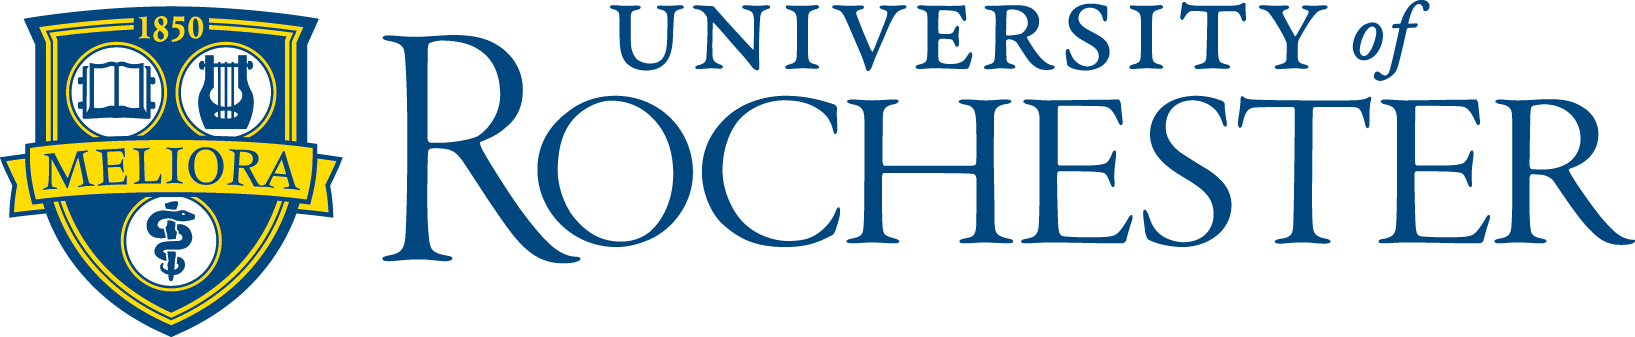 Rochester Logo - Symbols - About Us - University of Rochester